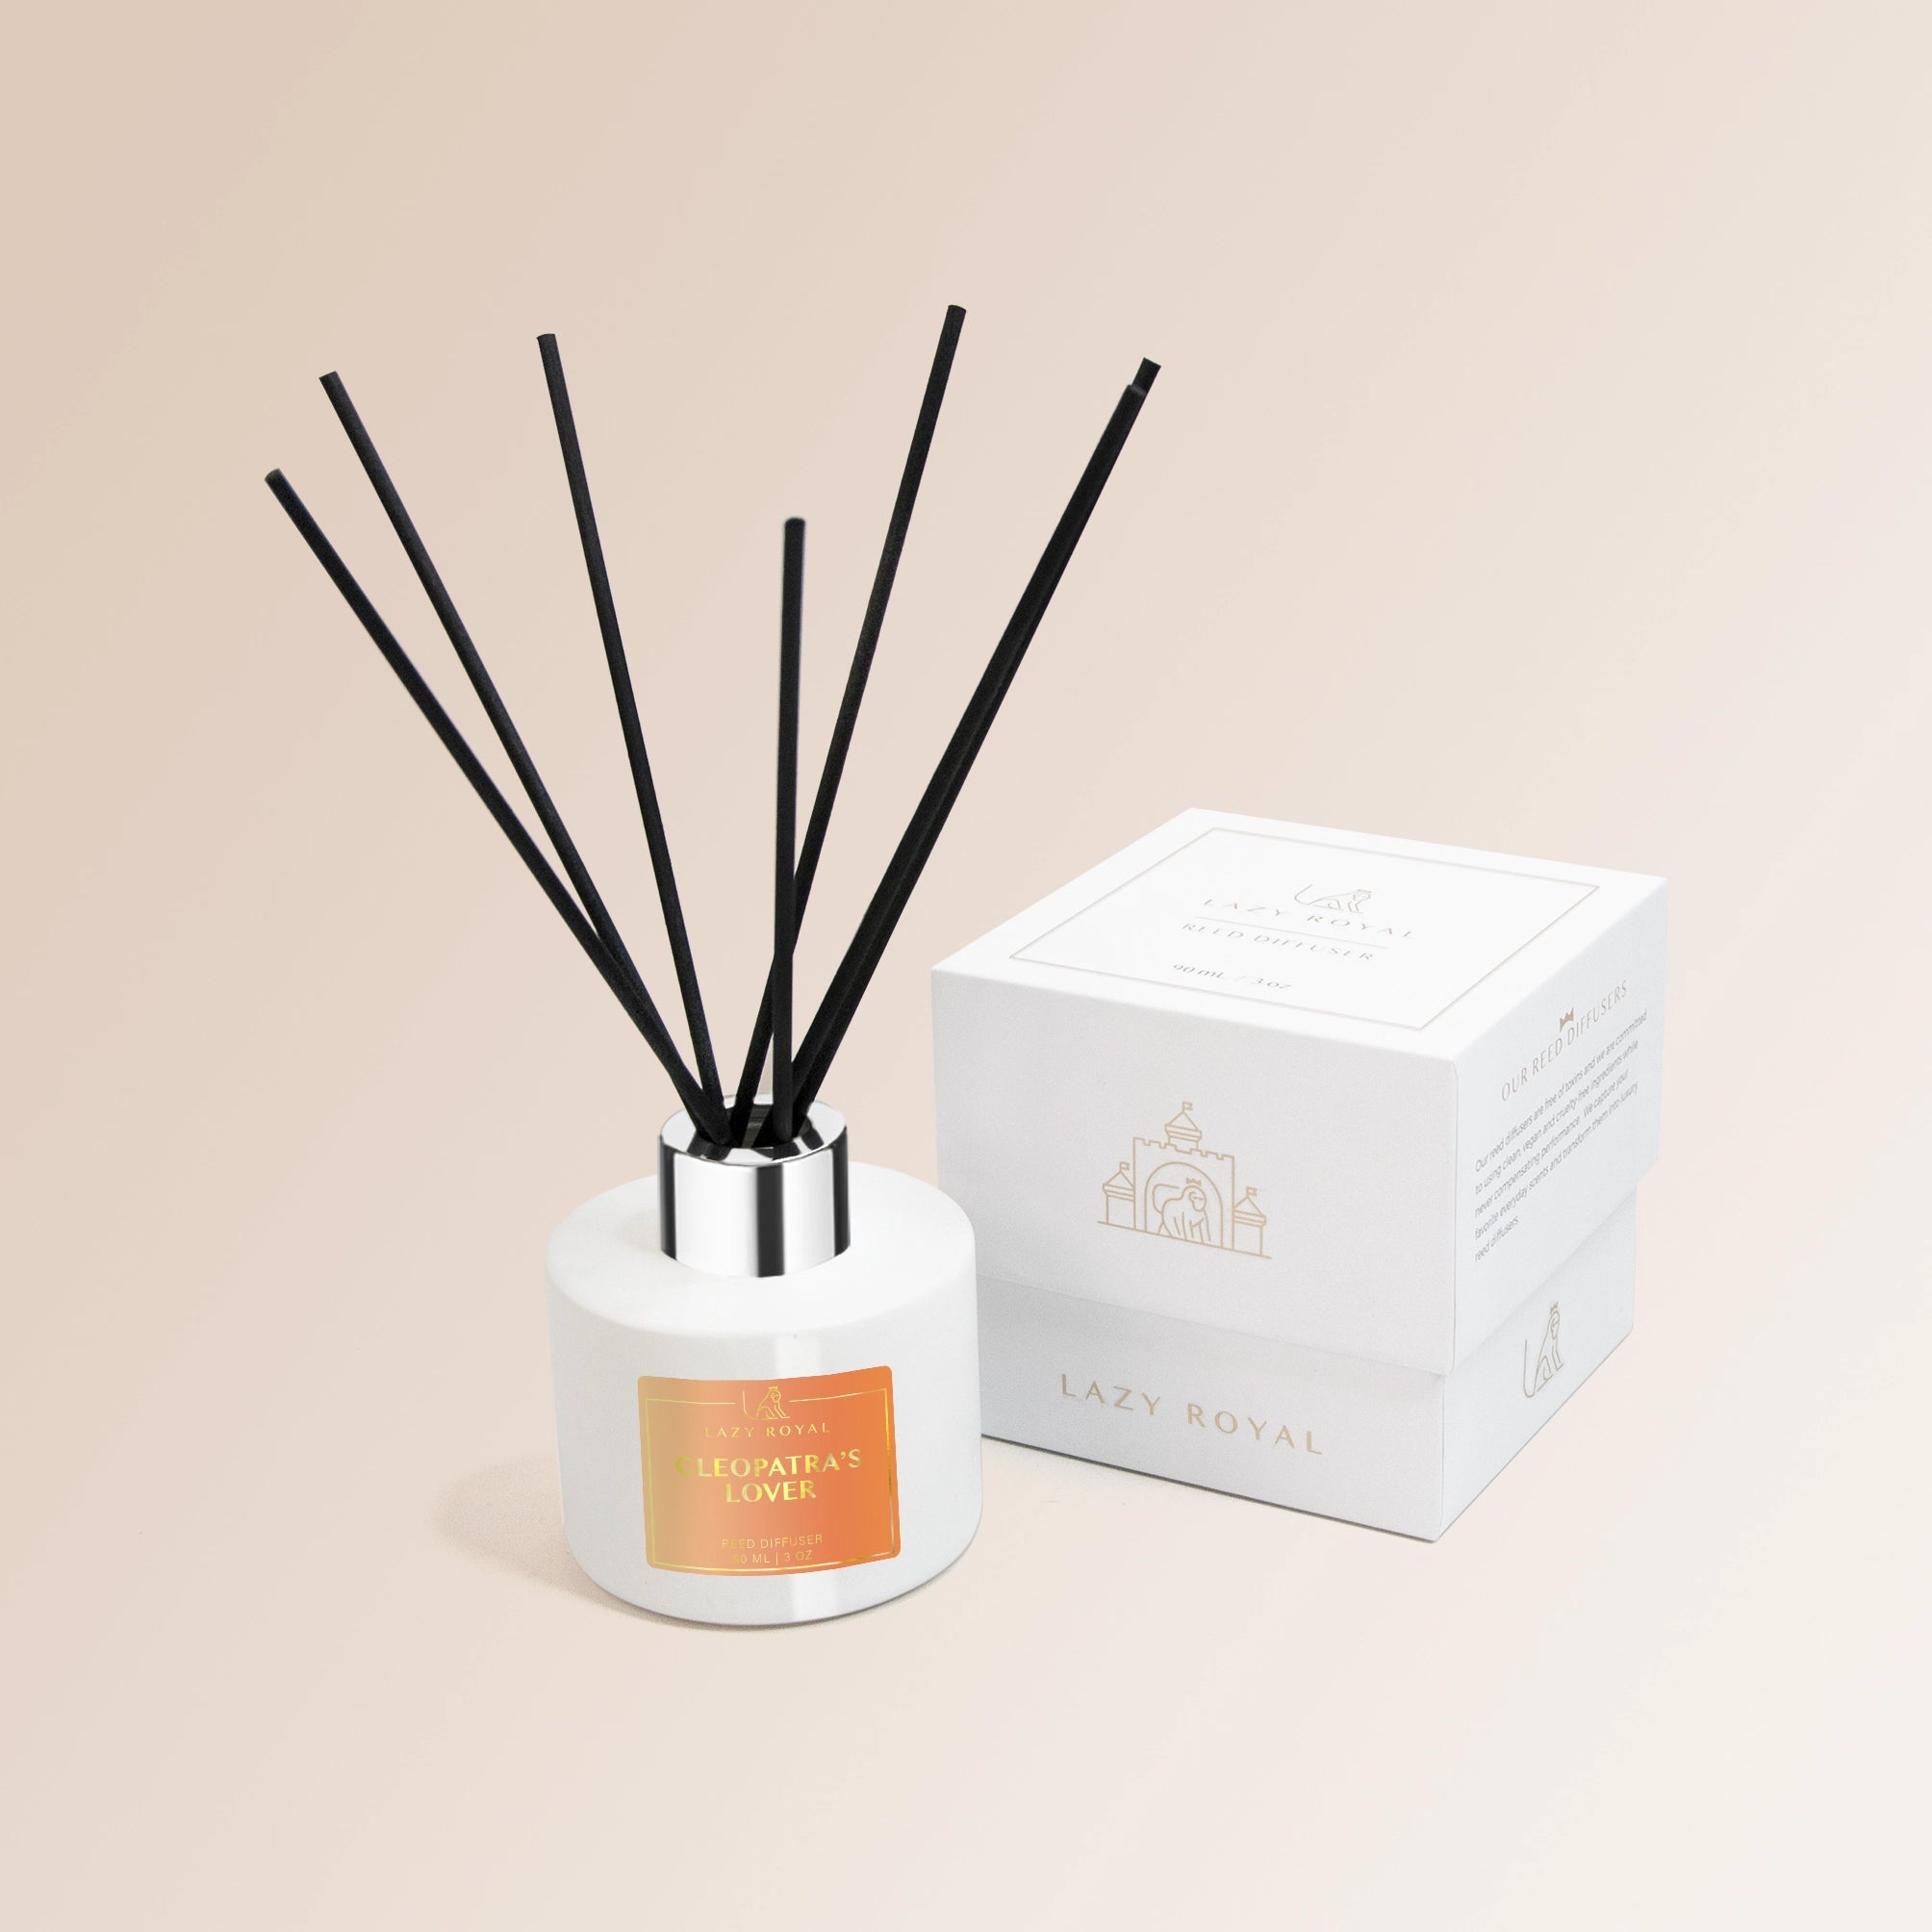 Inspired by Love by Kilian, Don't Be Shy - Cleopatra's Lover Reed Diffuser